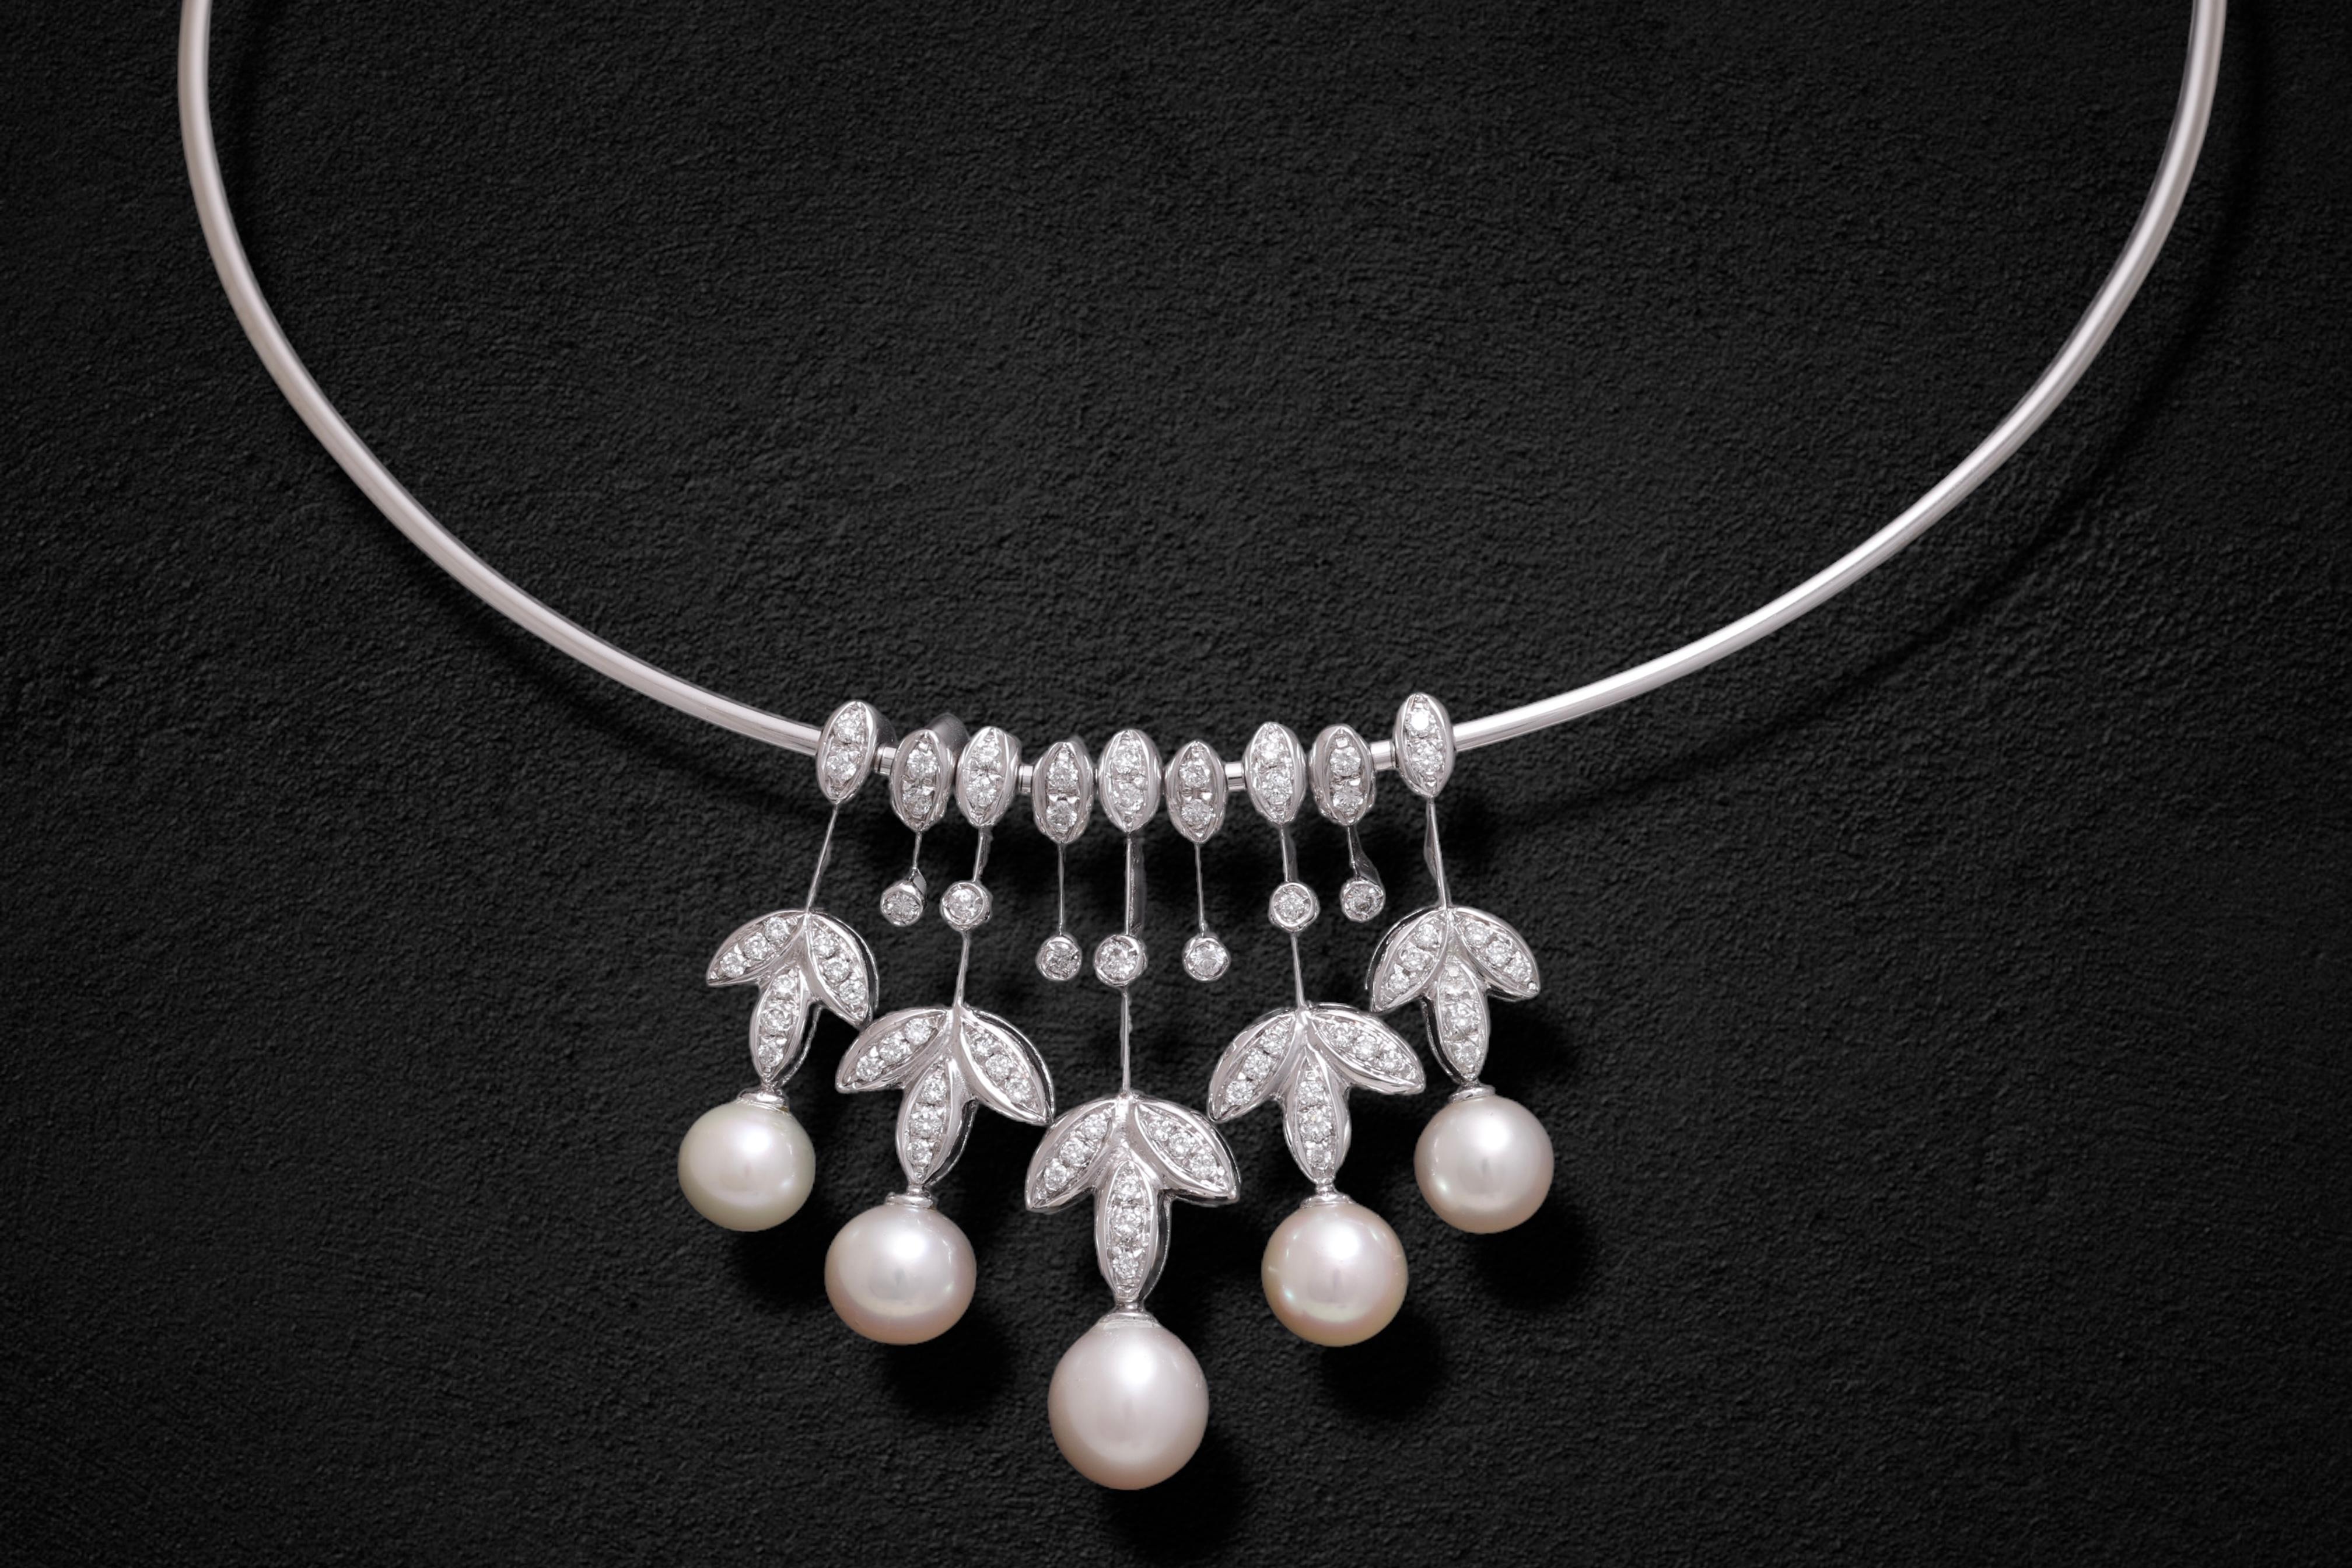 Gorgeous 18 kt white gold Sturdy necklace with sliding pendant with Diamonds & Pearls

Diamonds: Brilliant cut diamonds together 1.17 ct. G vs

Pearls: 5 pearls the biggest pearl has a diameter of 8.5 mm

Material: 18 kt. white gold

Measurements: